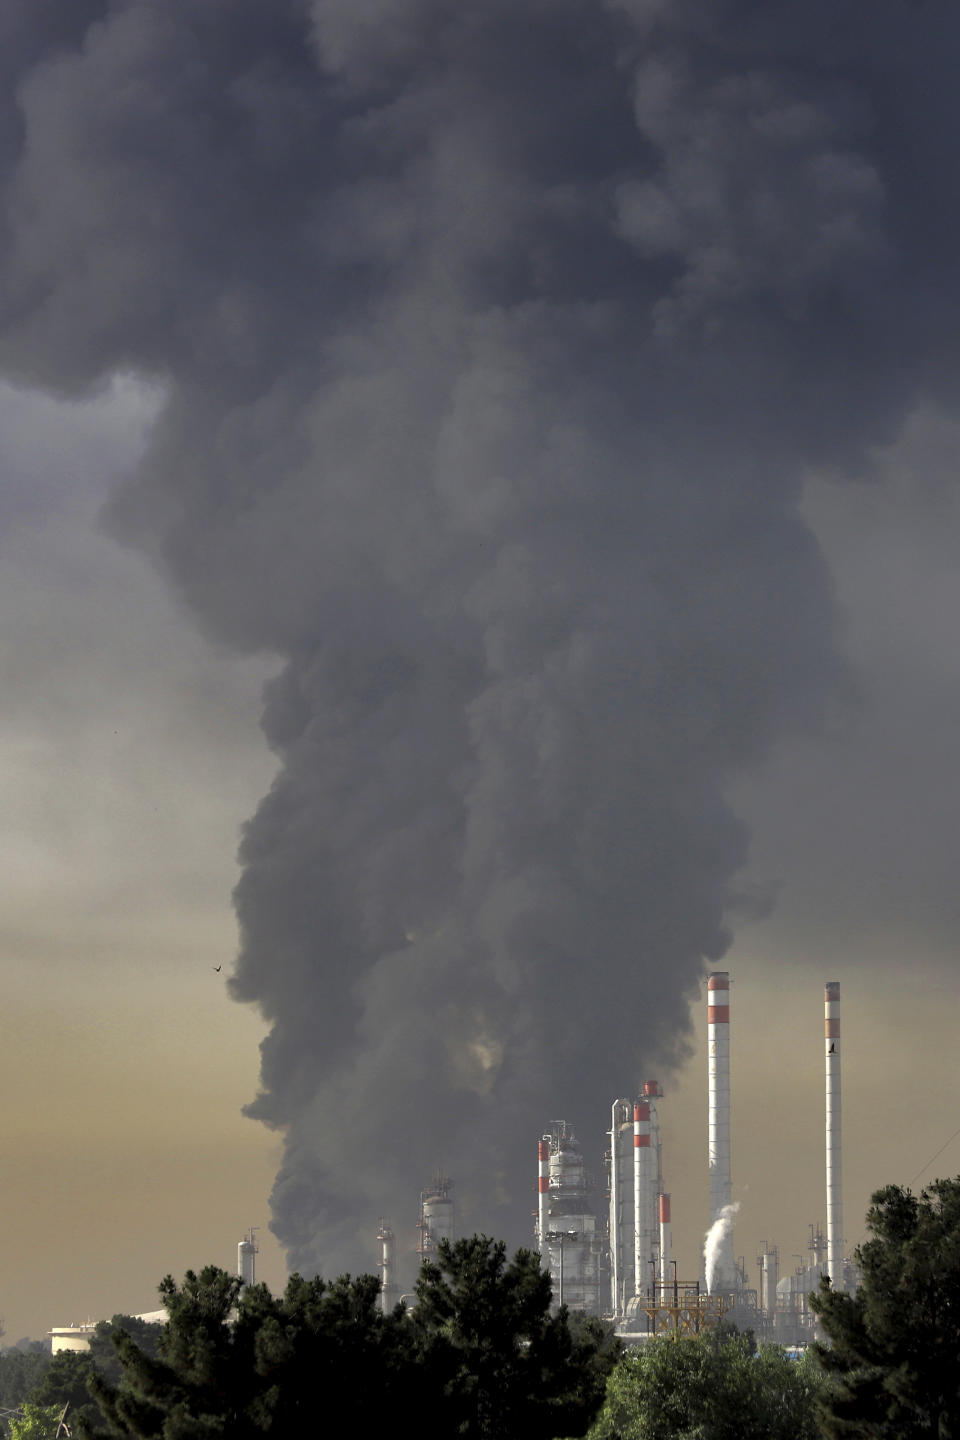 Huge plumes of smoke rise up from a main oil refinery south of Tehran, Iran, Thursday, June 3, 2021. A massive fire broke out Wednesday night at the oil refinery serving Iran's capital, sending thick plumes of black smoke over Tehran. (AP Photo/Ebrahim Noroozi)